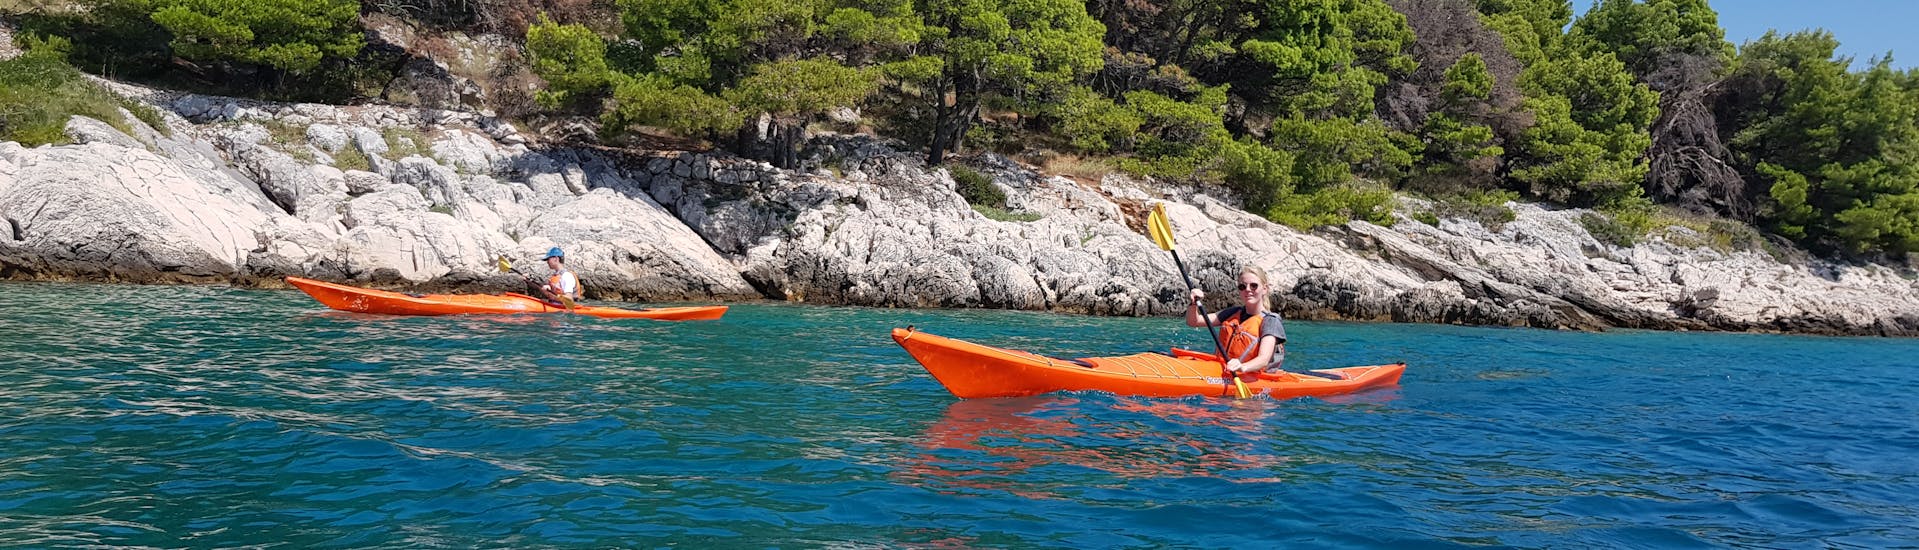 Two participants in kayaks on the water, enjoying the Private Sea Kayak Tour from Zlarin to Prvić and Tijat - Half Day.